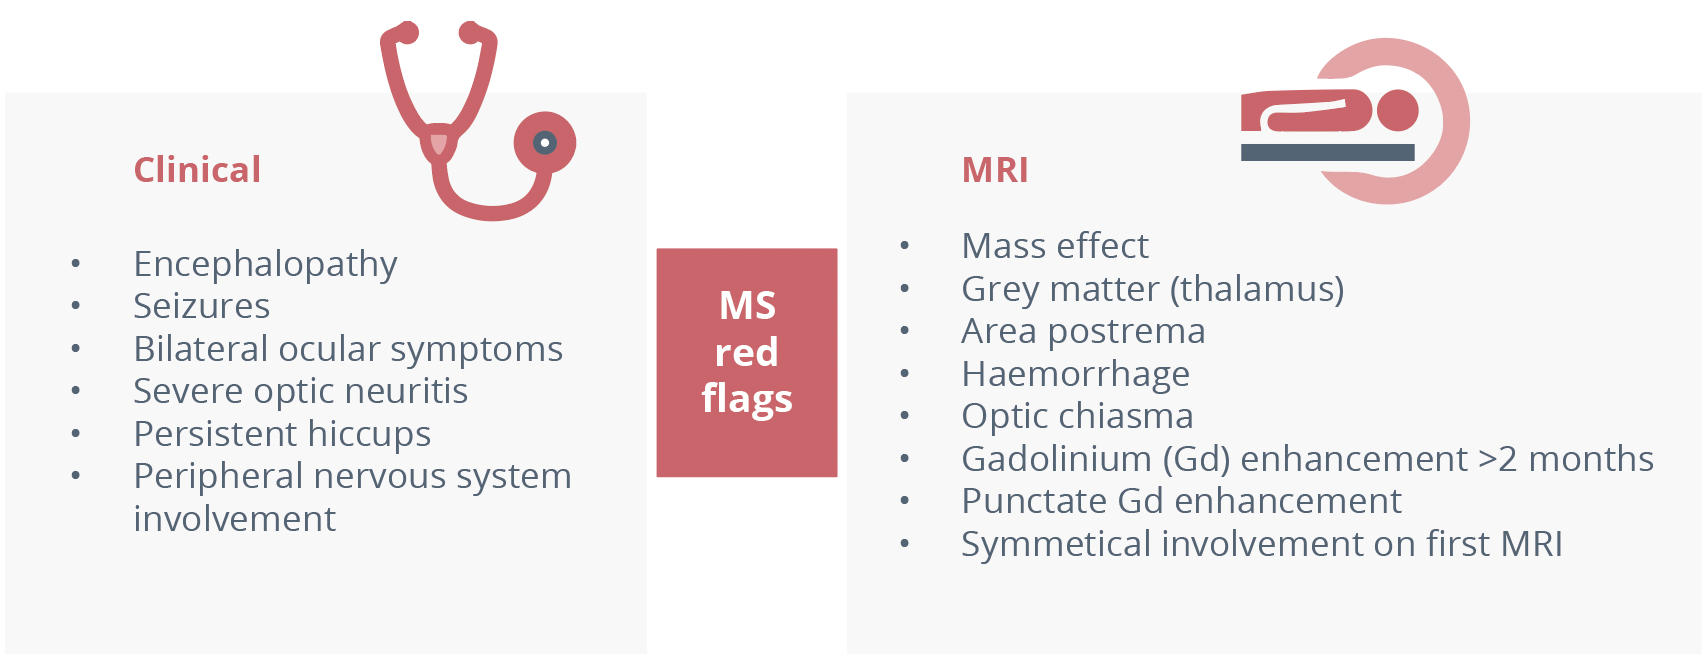 red flag clinical findings and MRI features which suggest alternative diagnoses to MS